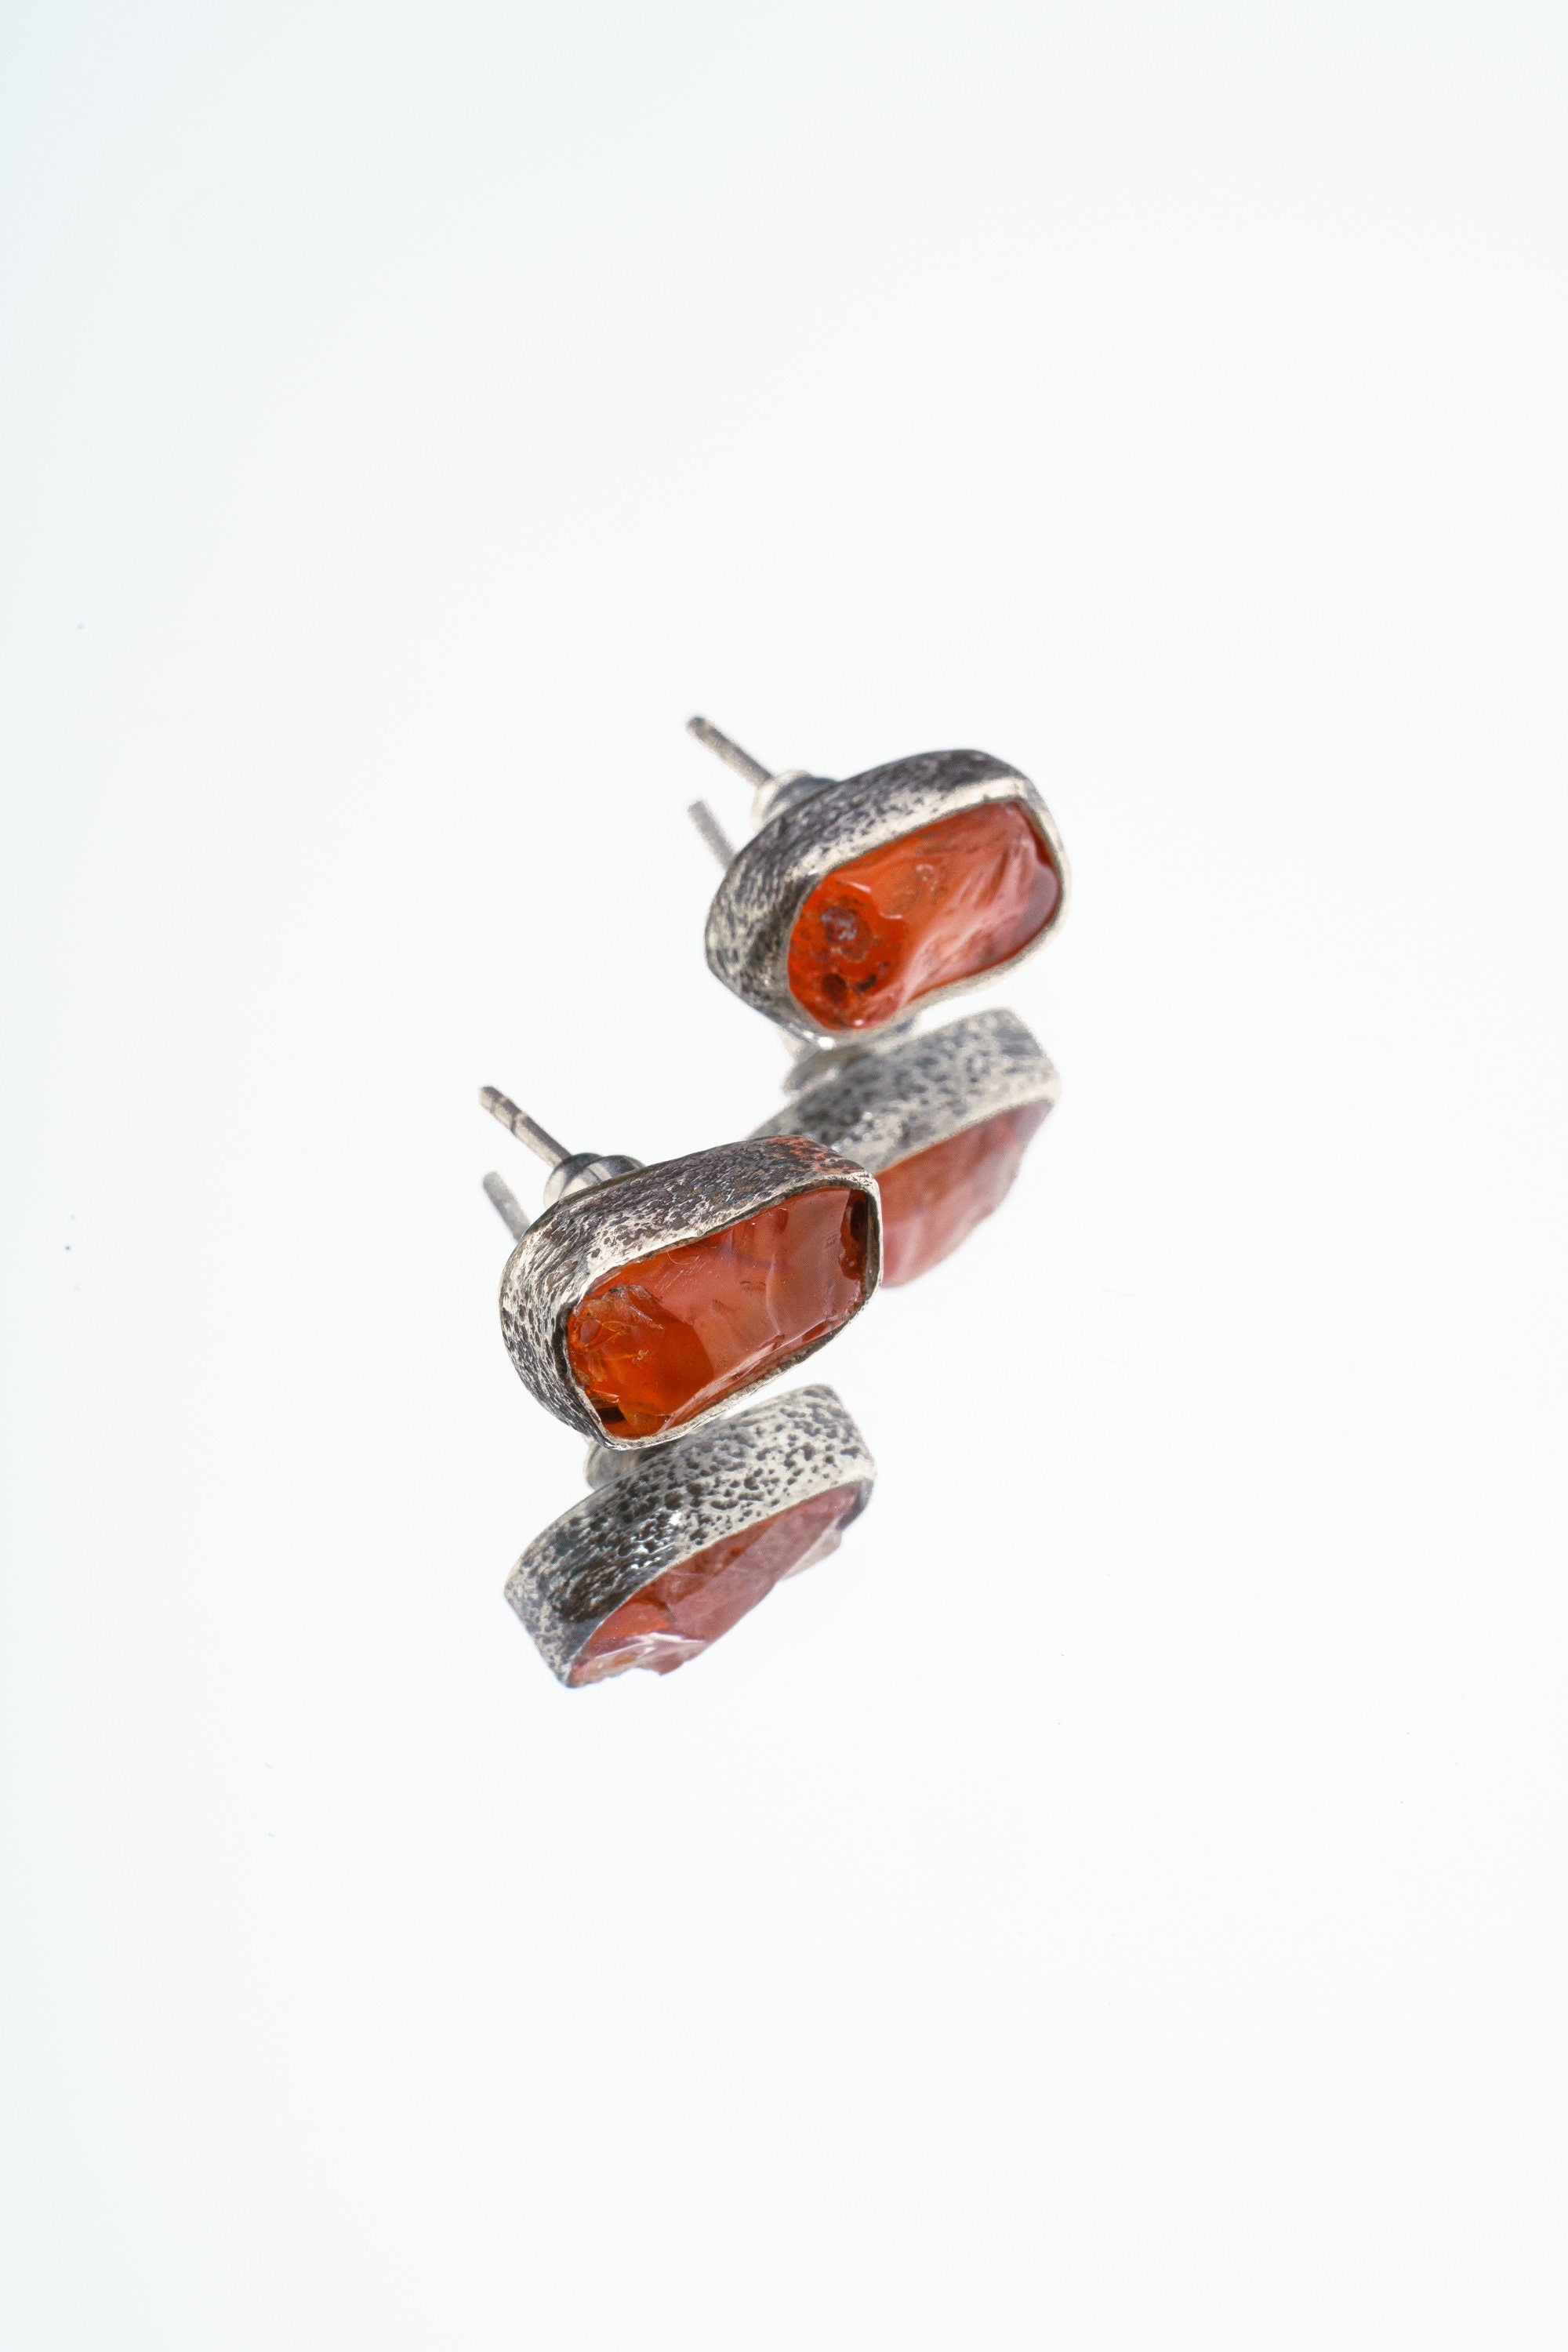 Organic shaped Carnelian Agate Pair- Textured Finish - Sterling Silver - Freeform Earring Studs